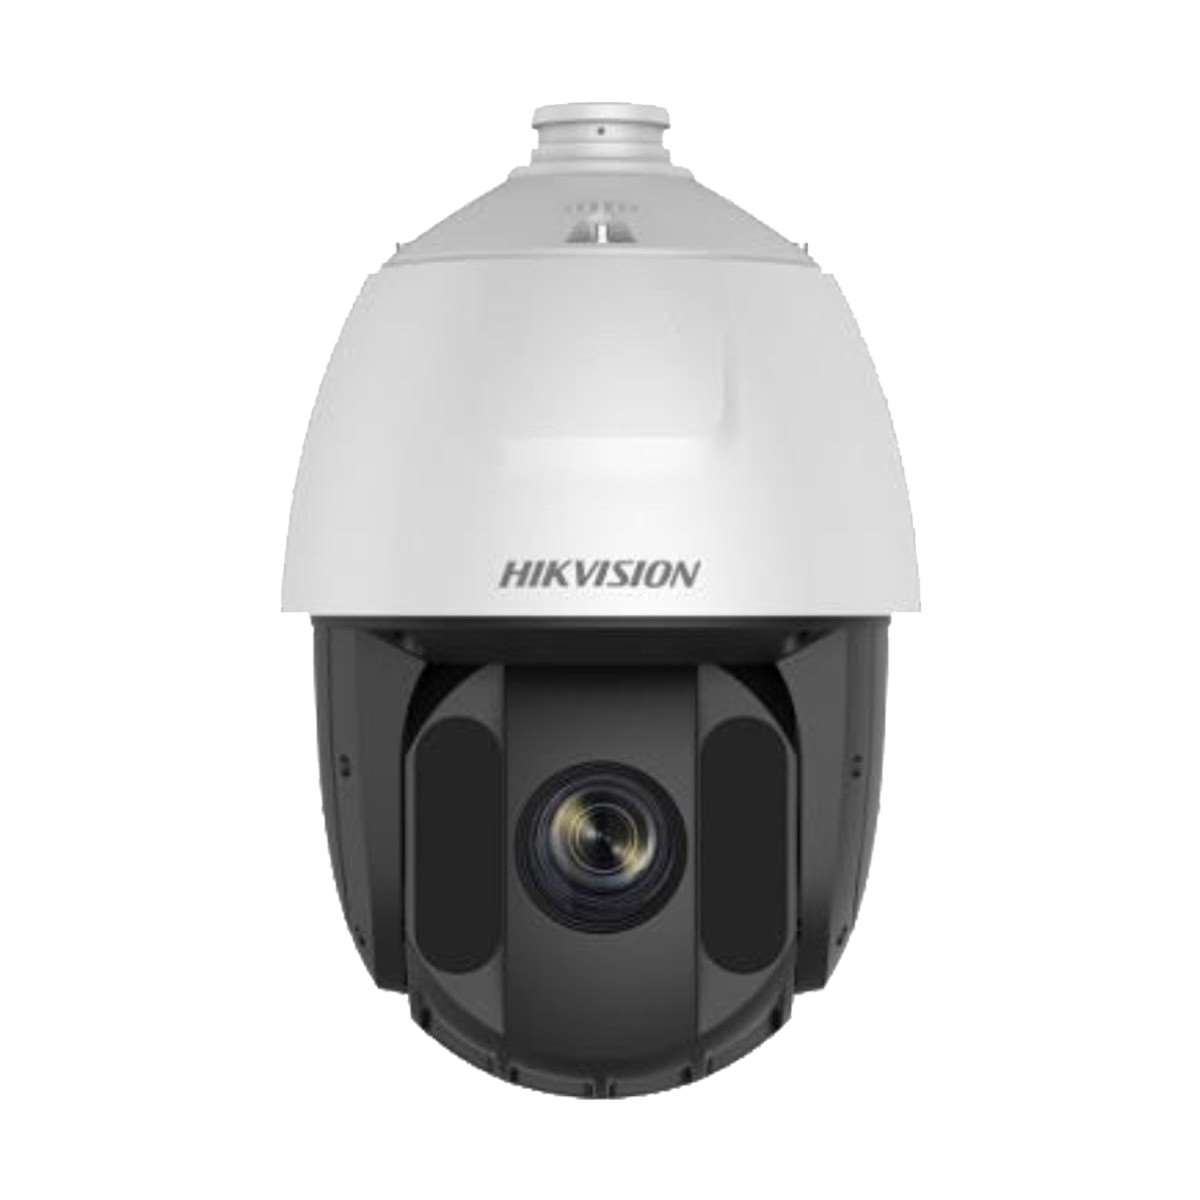 Hikvision 2MP Outdoor PTZ Dome Camera DS-2DE5225IW-AE